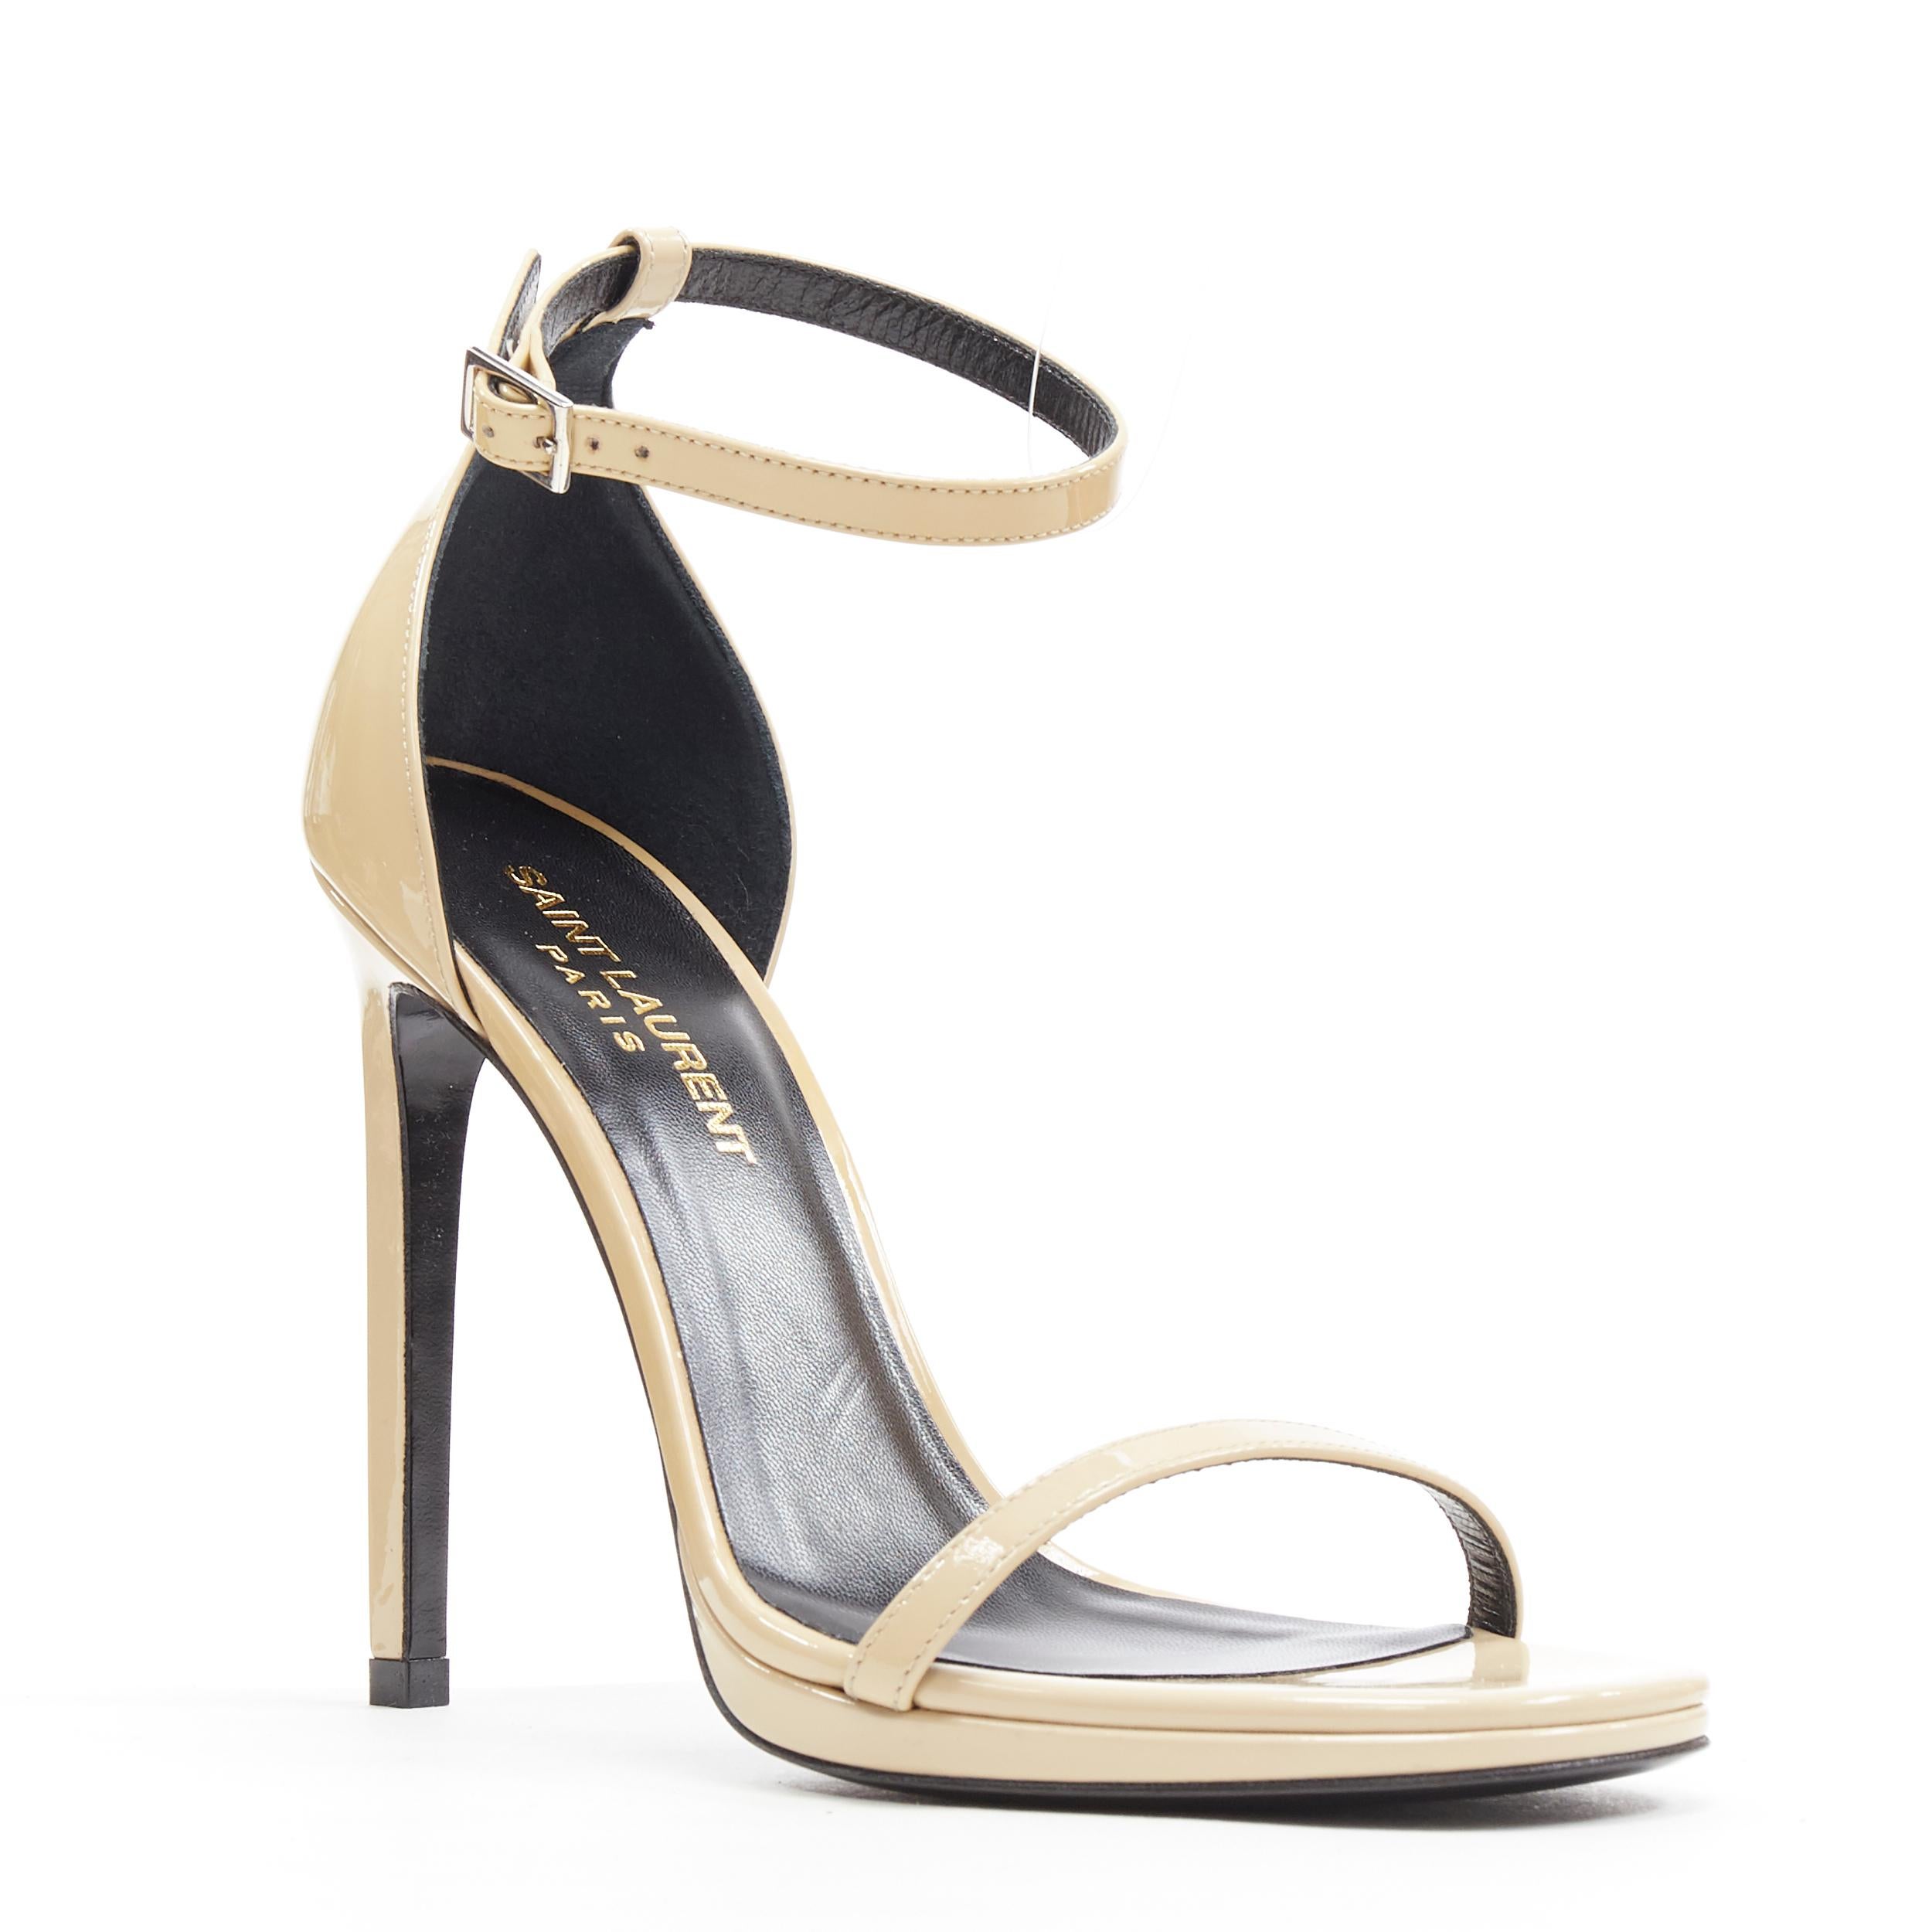 SAINT LAURENT PARIS  beige nude patent minimalist  strappy sandals EU36
Brand: Saint Laurent
Model Name / Style: Patent sandals
Material: Patent leather
Color: Beige
Pattern: Solid
Closure: Ankle strap
Extra Detail: Ultra High (4 in & Higher) heel